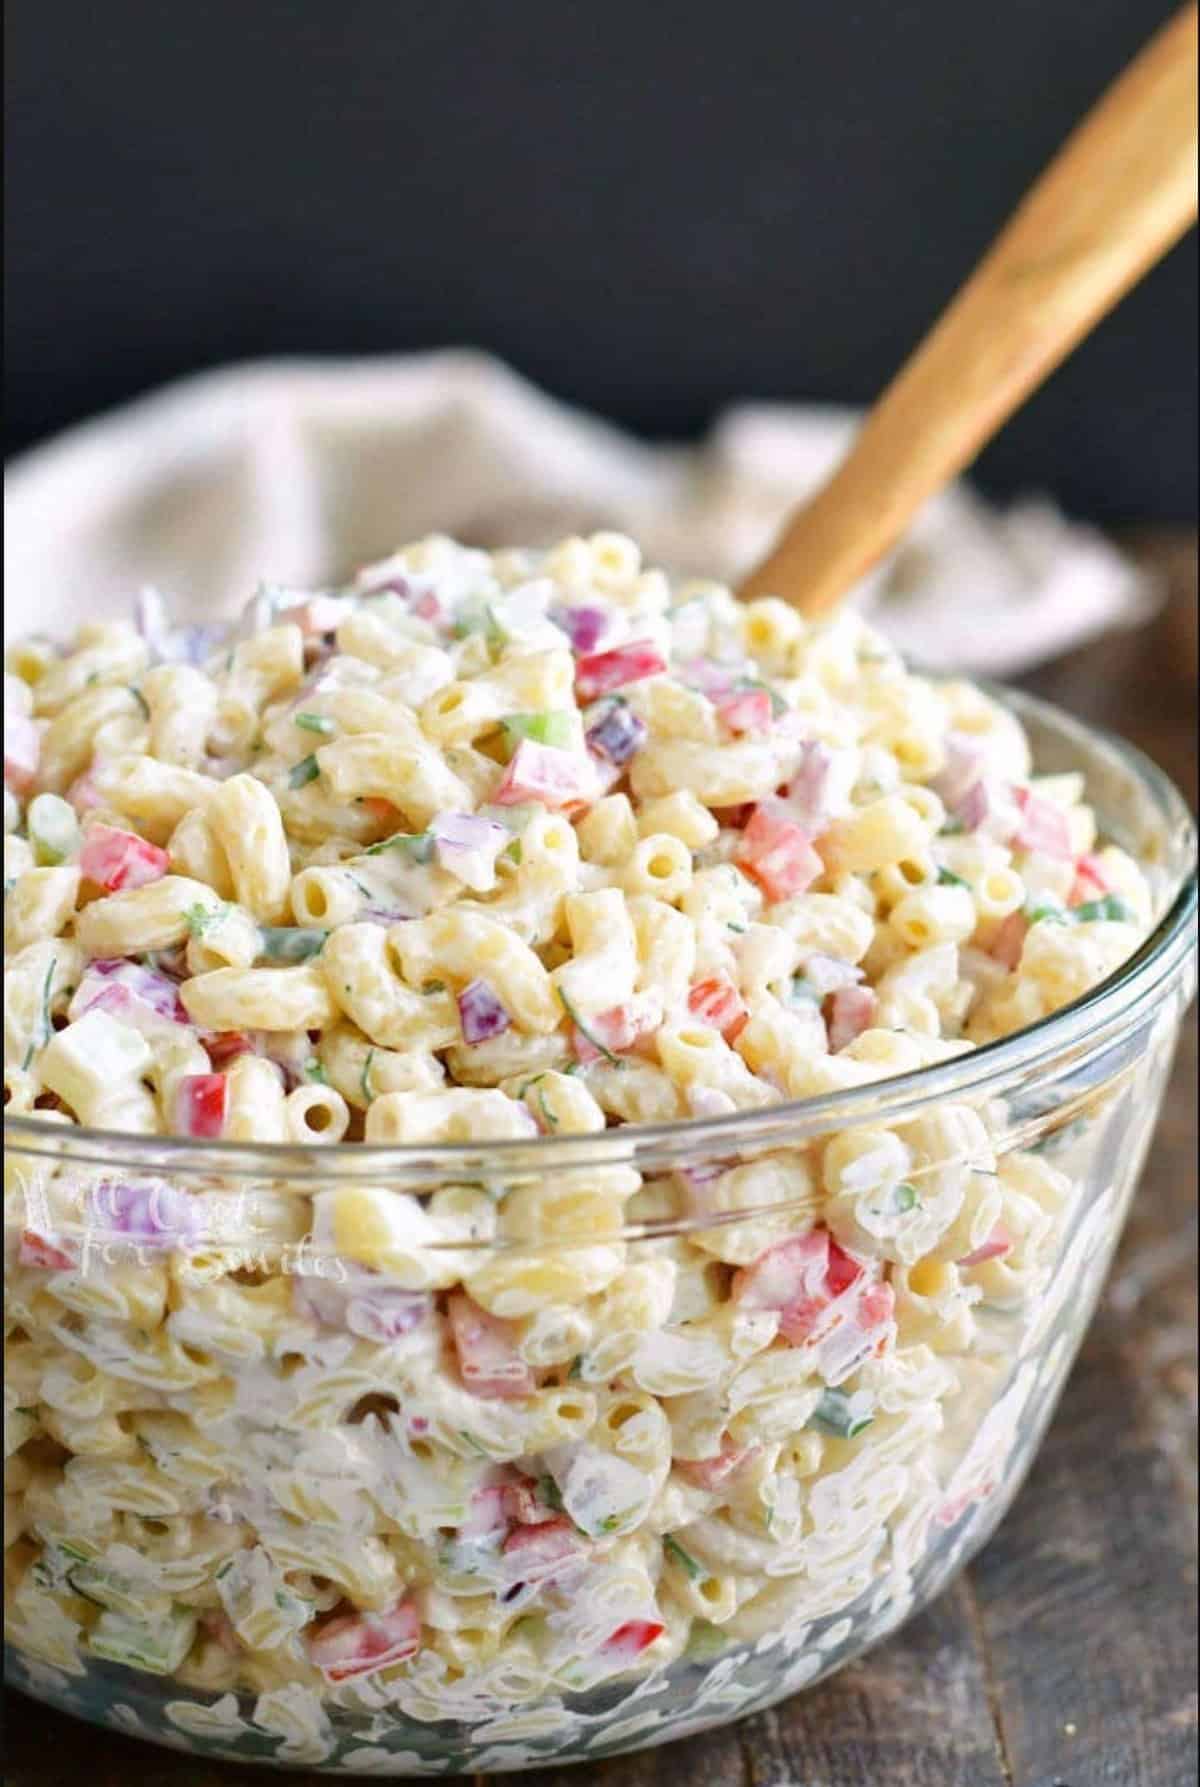 a large glass bowl filled with colorful creamy macaroni salad and a wooden spoon.